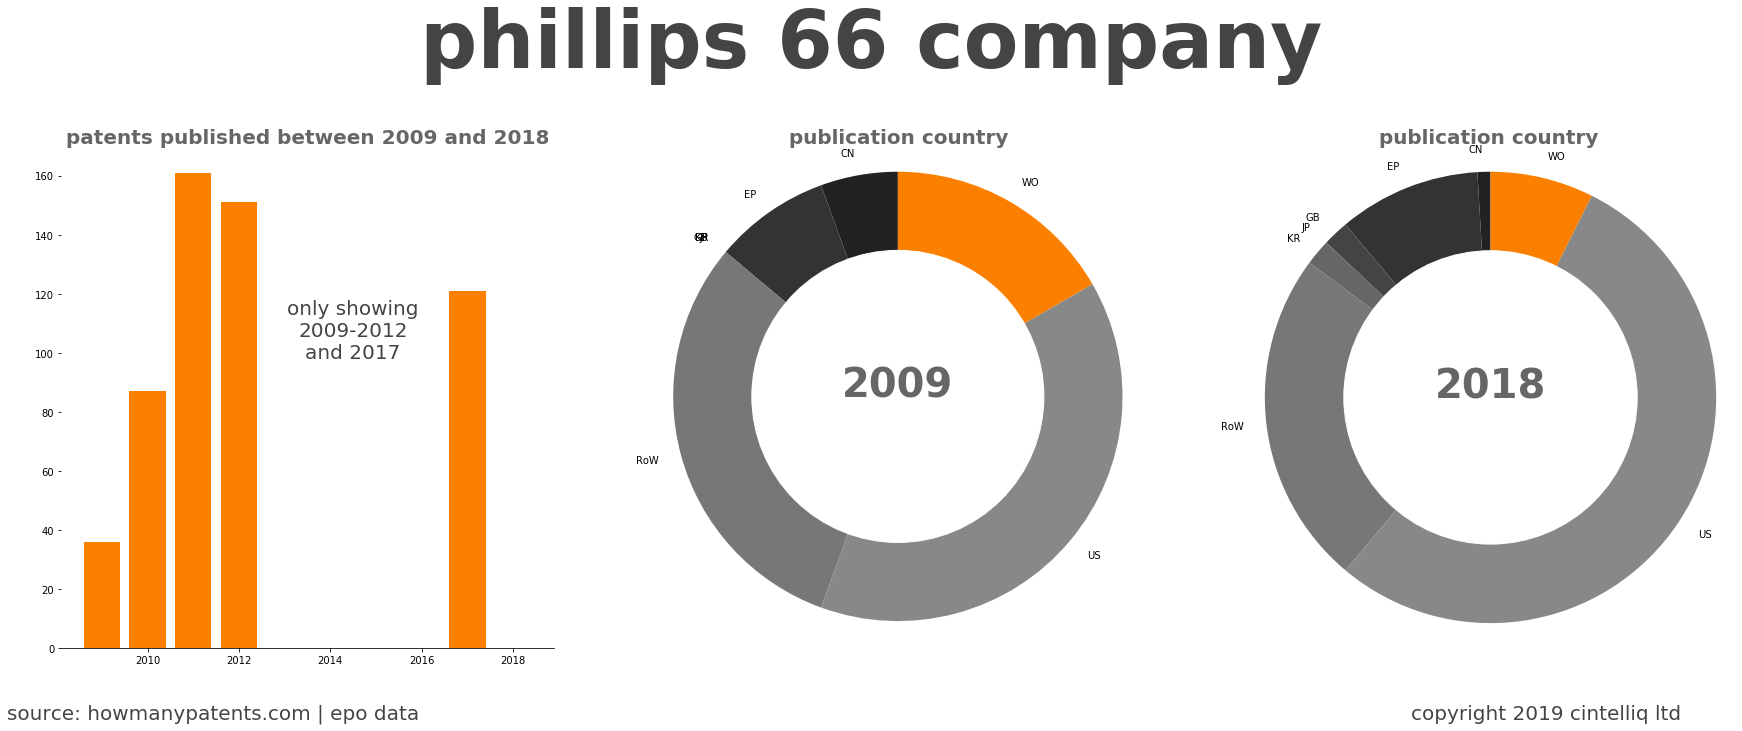 summary of patents for Phillips 66 Company